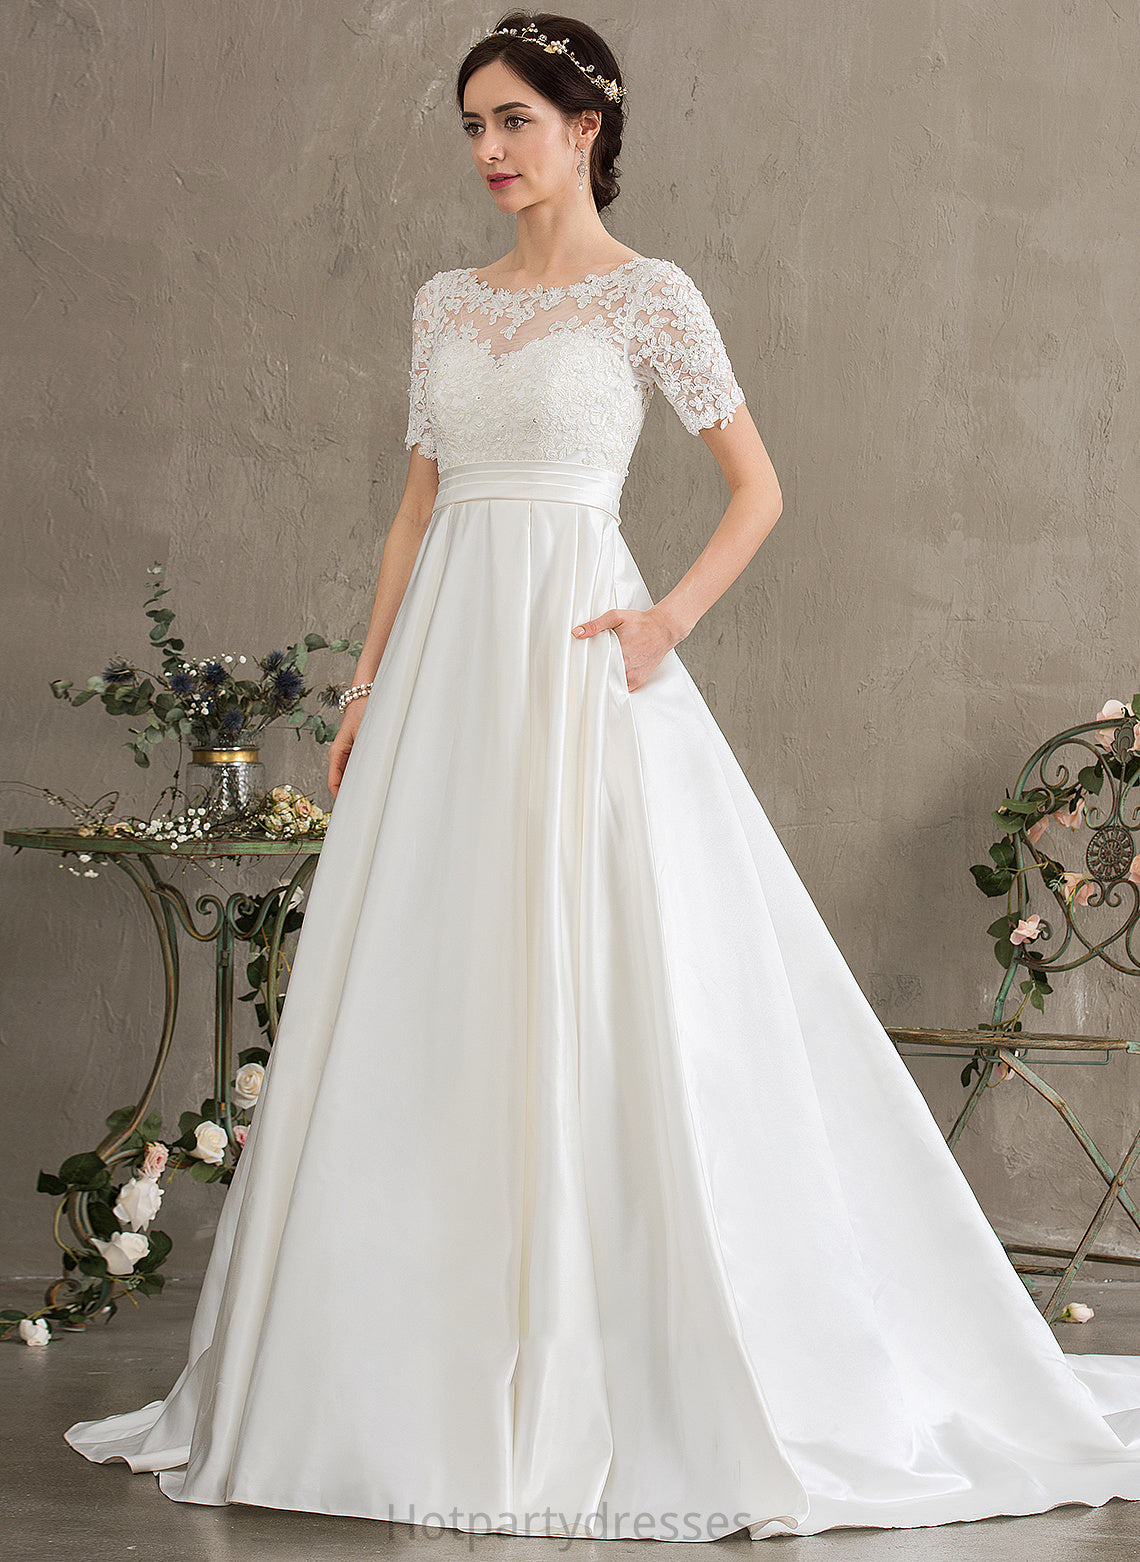 Beading Wedding Dresses With Scoop Sequins Wedding Neck Satin Ball-Gown/Princess Avery Court Pockets Dress Train